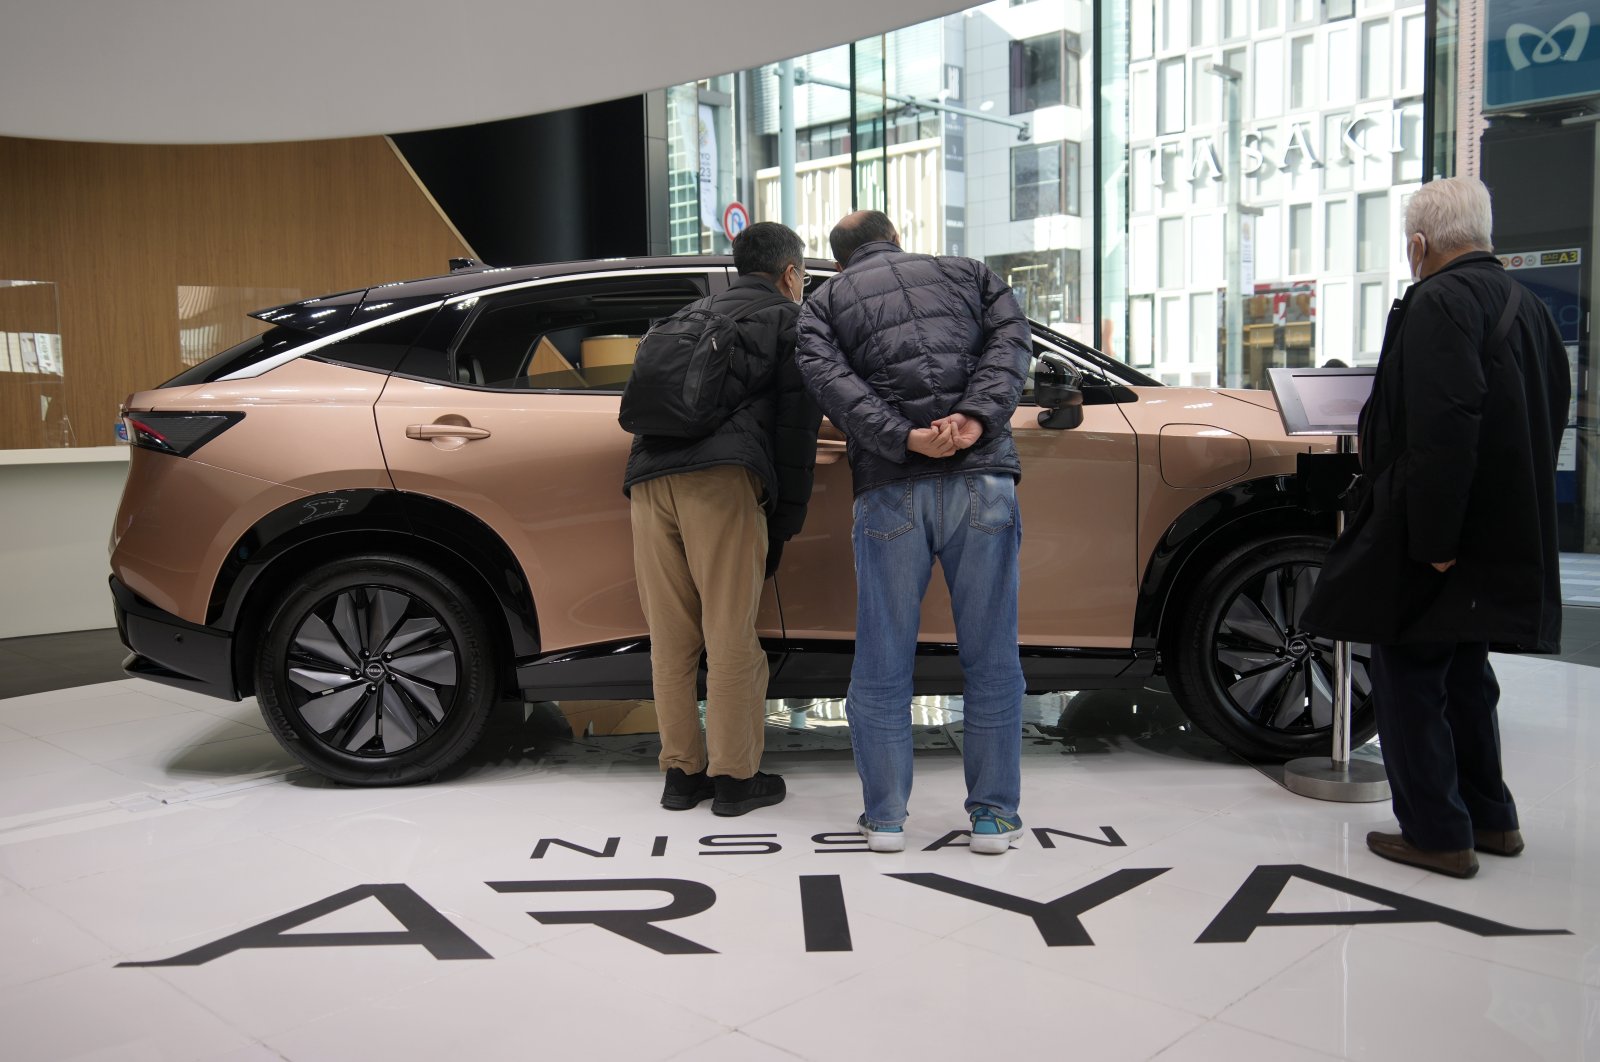 Visitors inspect an Ariya, Nissan&#039;s first all-electric crossover SUV, at a Nissan showroom in Tokyo, Japan, Feb. 6, 2023. (EPA File Photo)